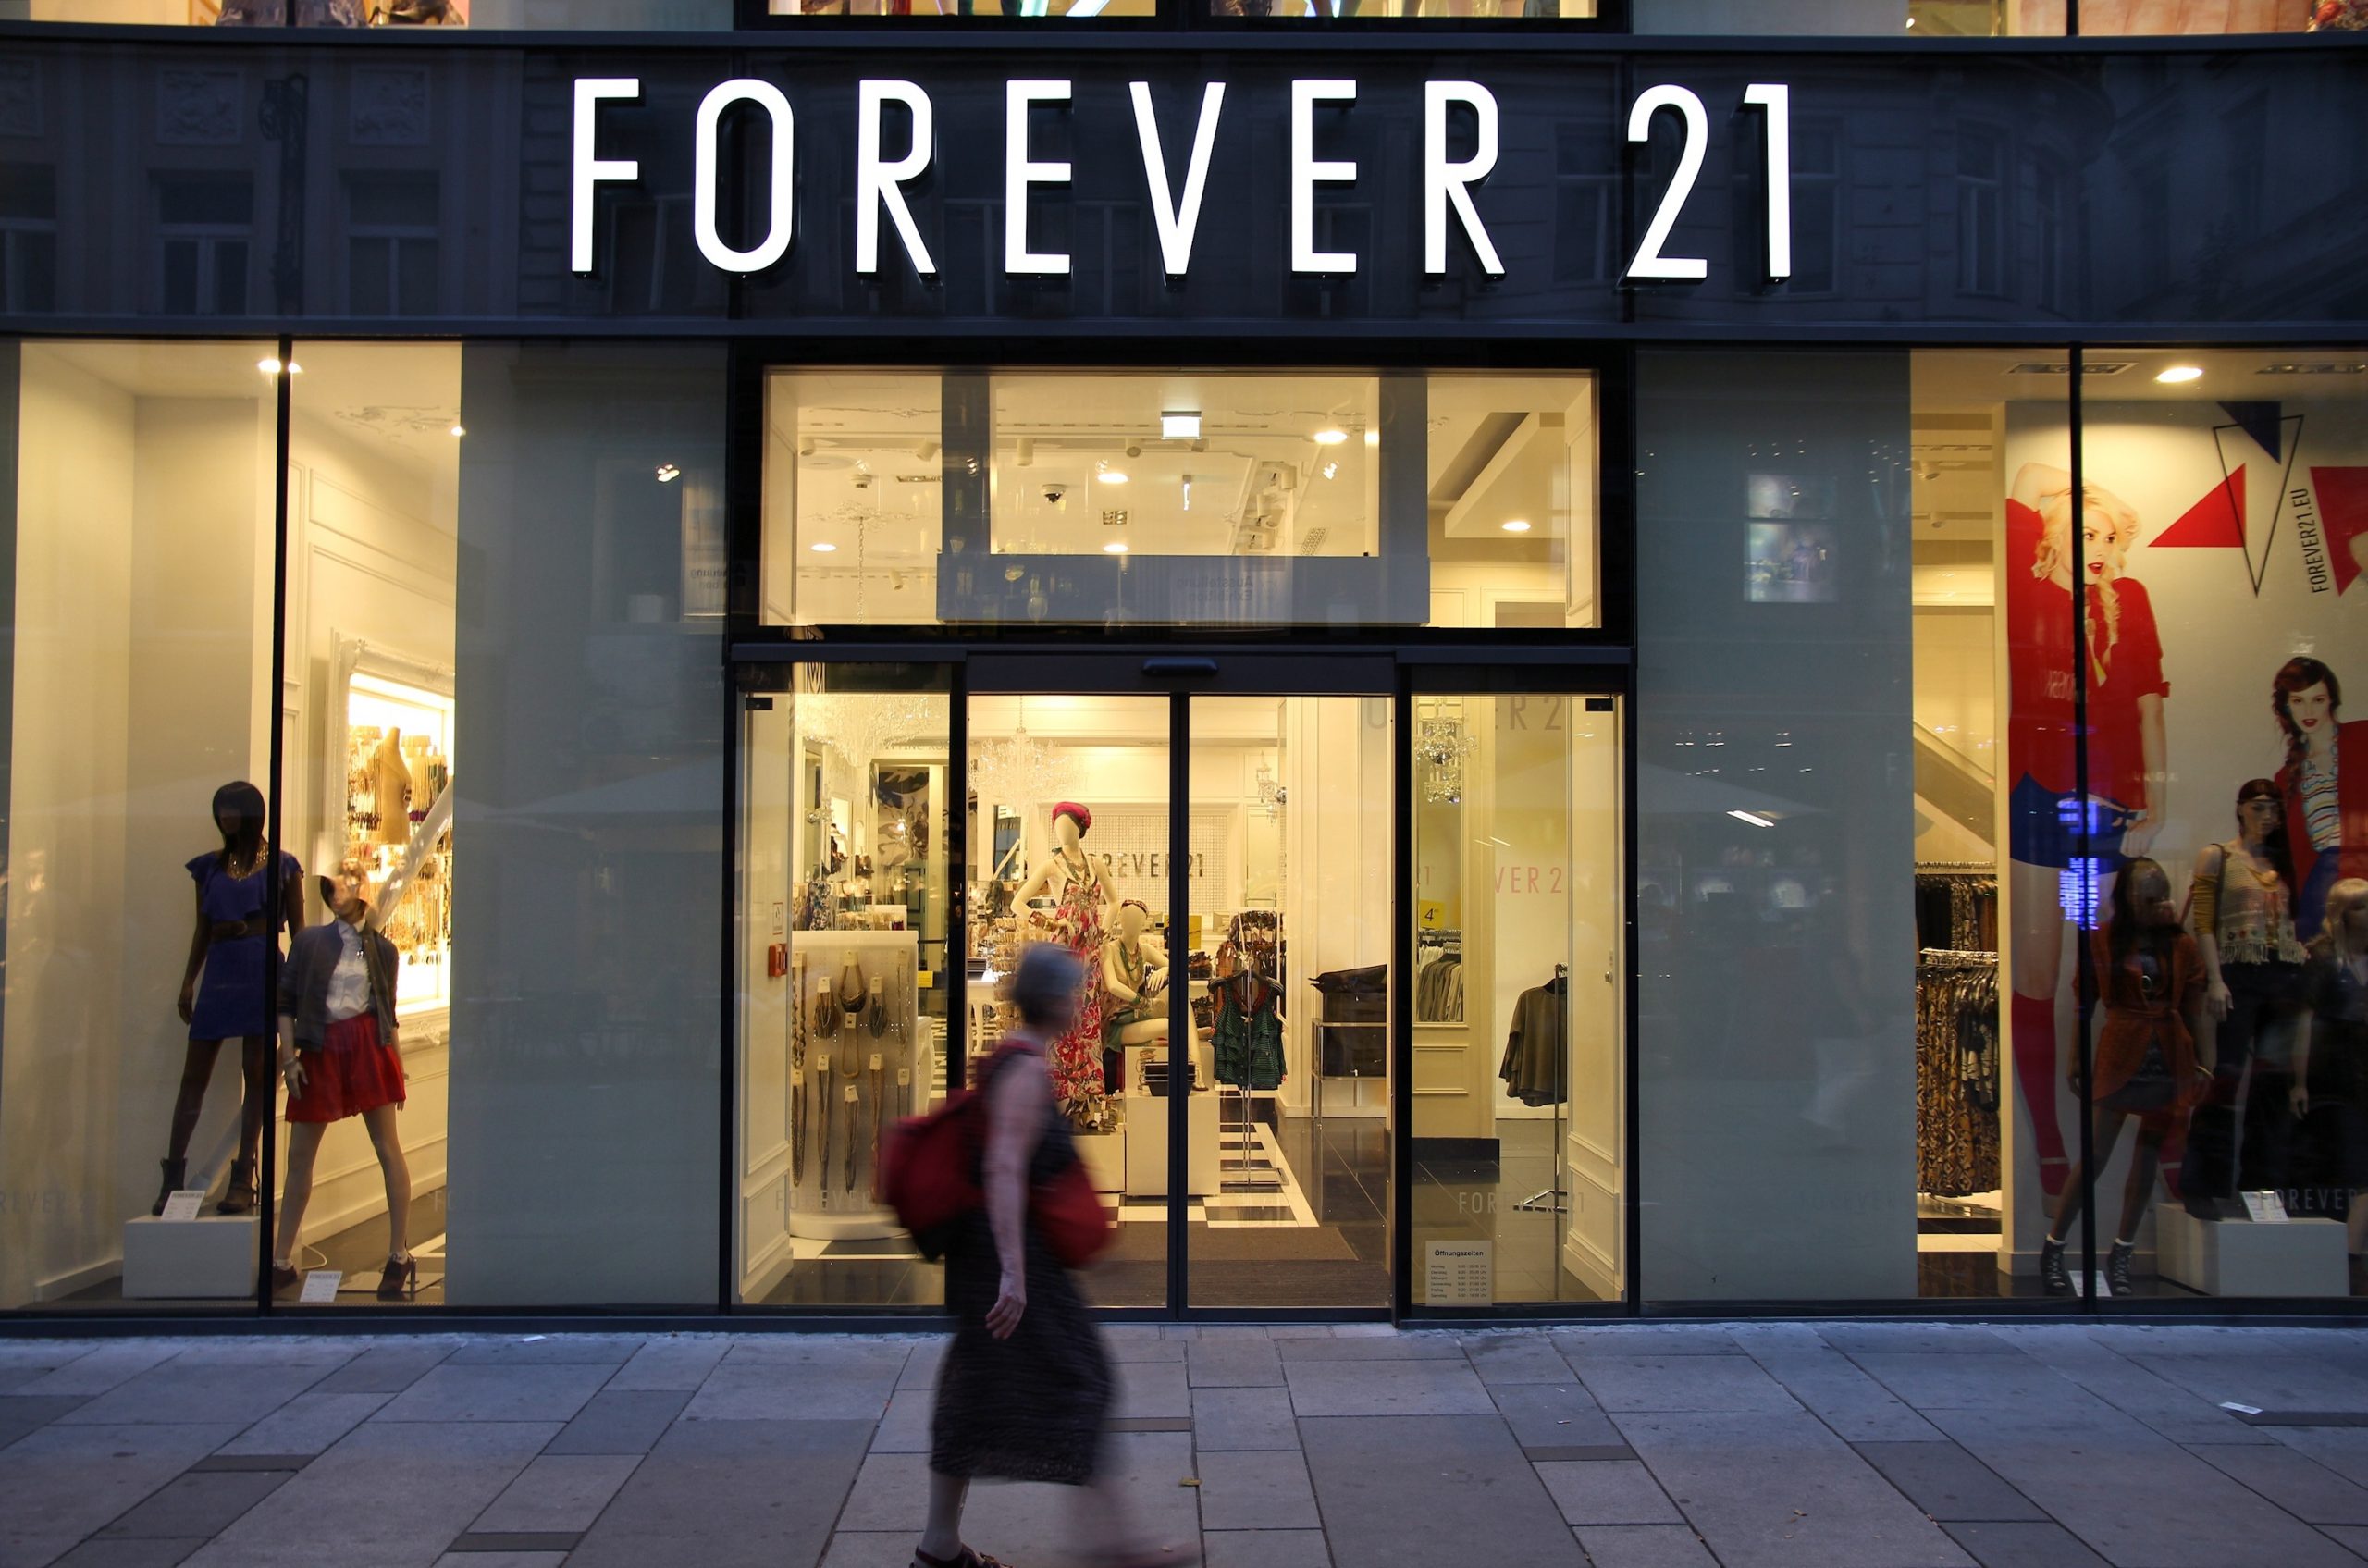 Forever 21 Is Closing More Than 100 Stores Across the U.S. See the Full List Here